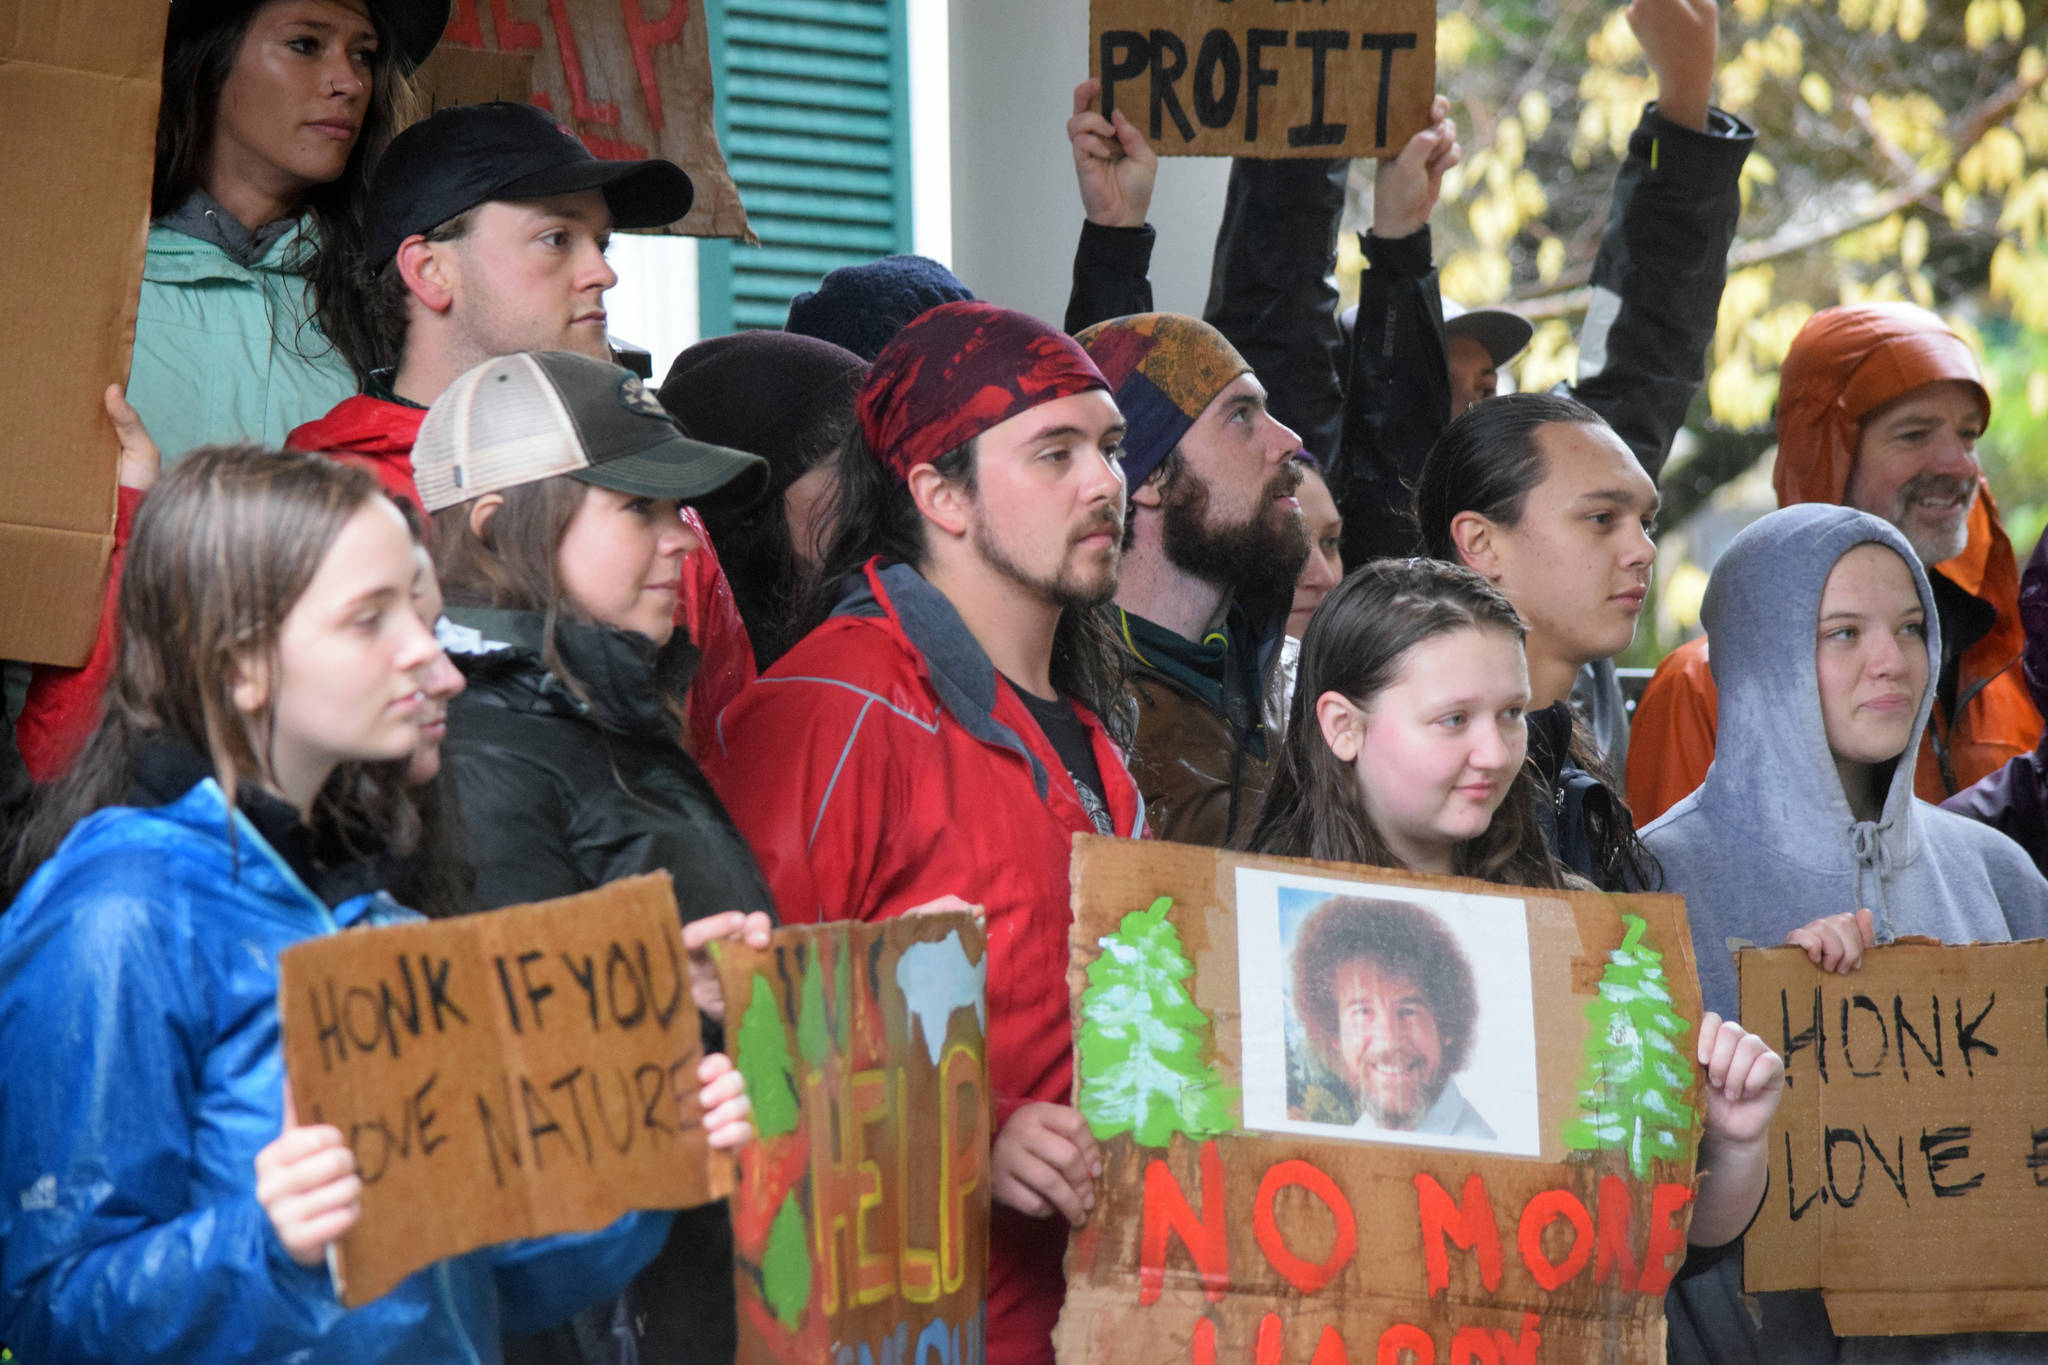 Climate protesters gather in front of the governor’s mansion to protest lack of action on climate change on Friday, Sept. 20, 2019. (Peter Segall | Juneau Empire)